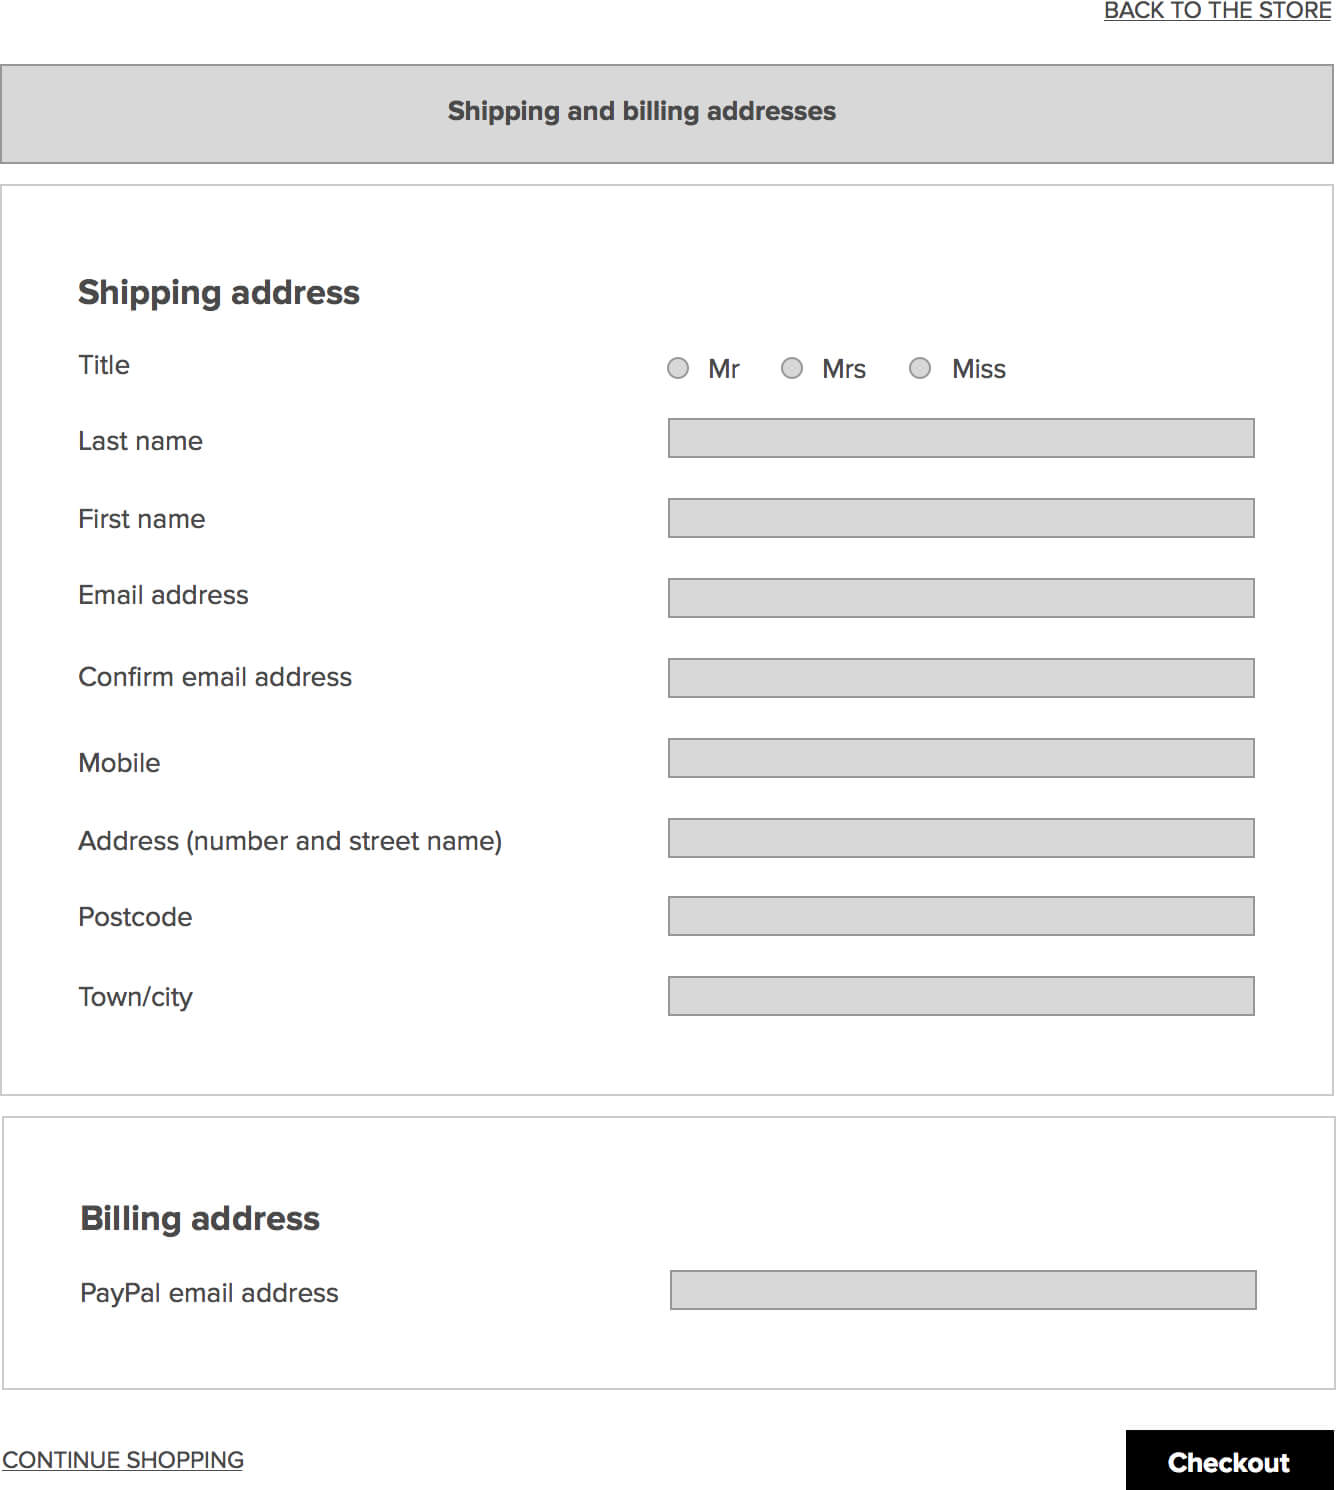 Step 5: Provide contact/billing information and check out